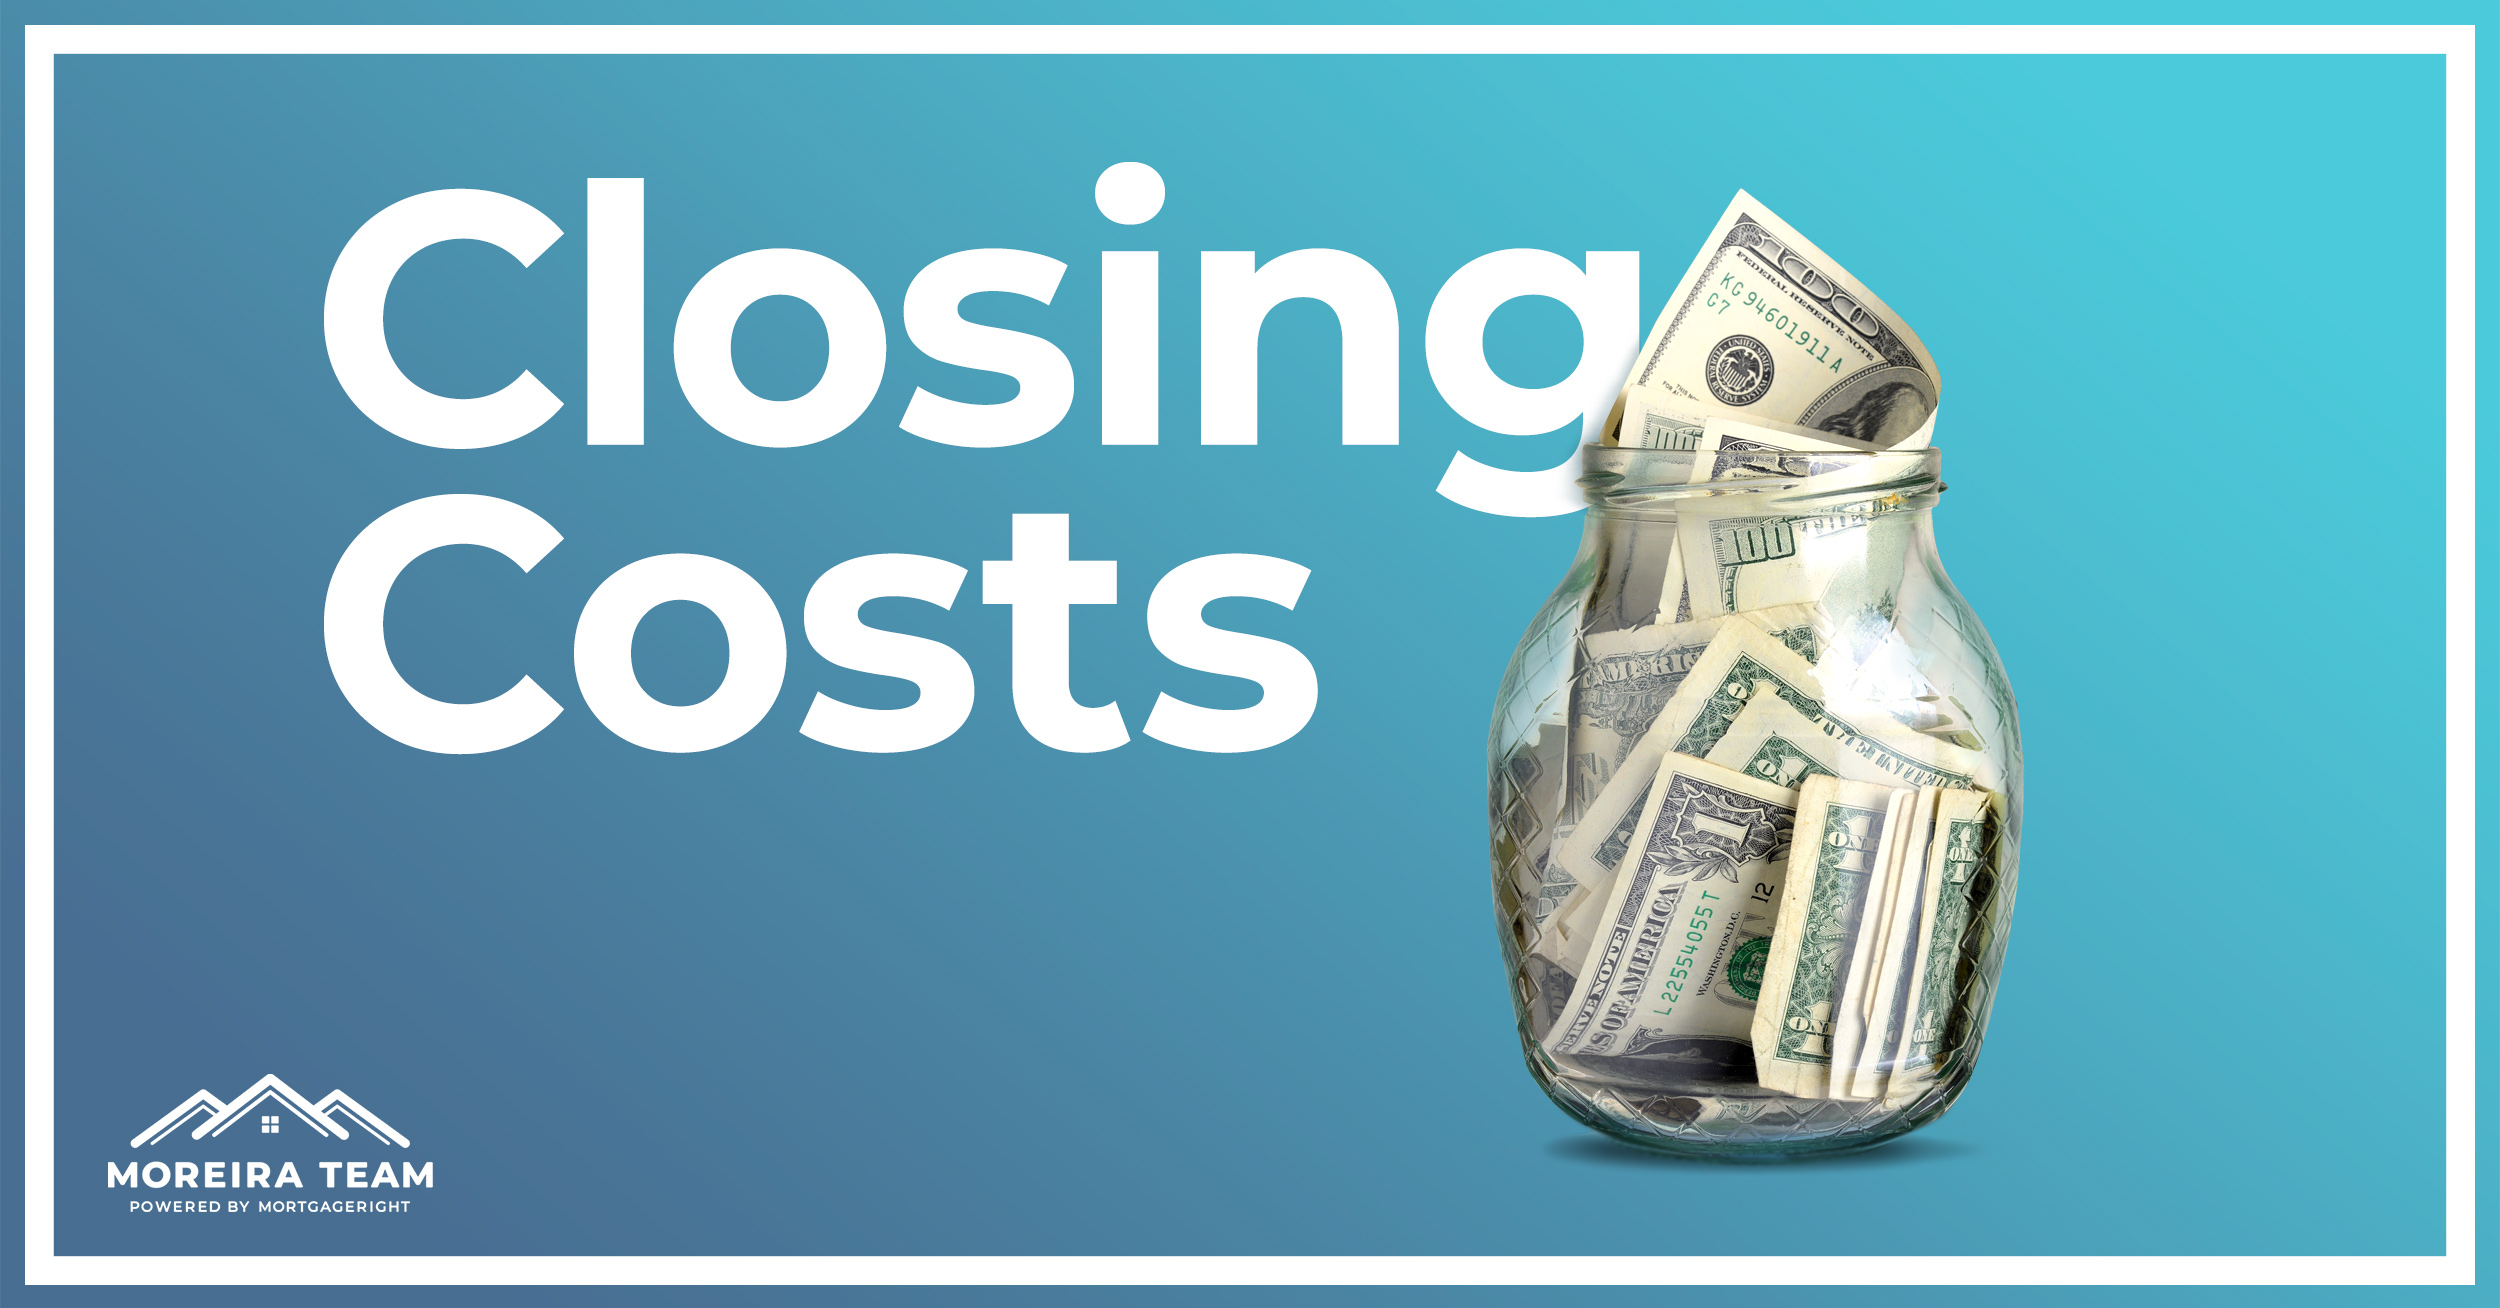 What are Closing Costs?